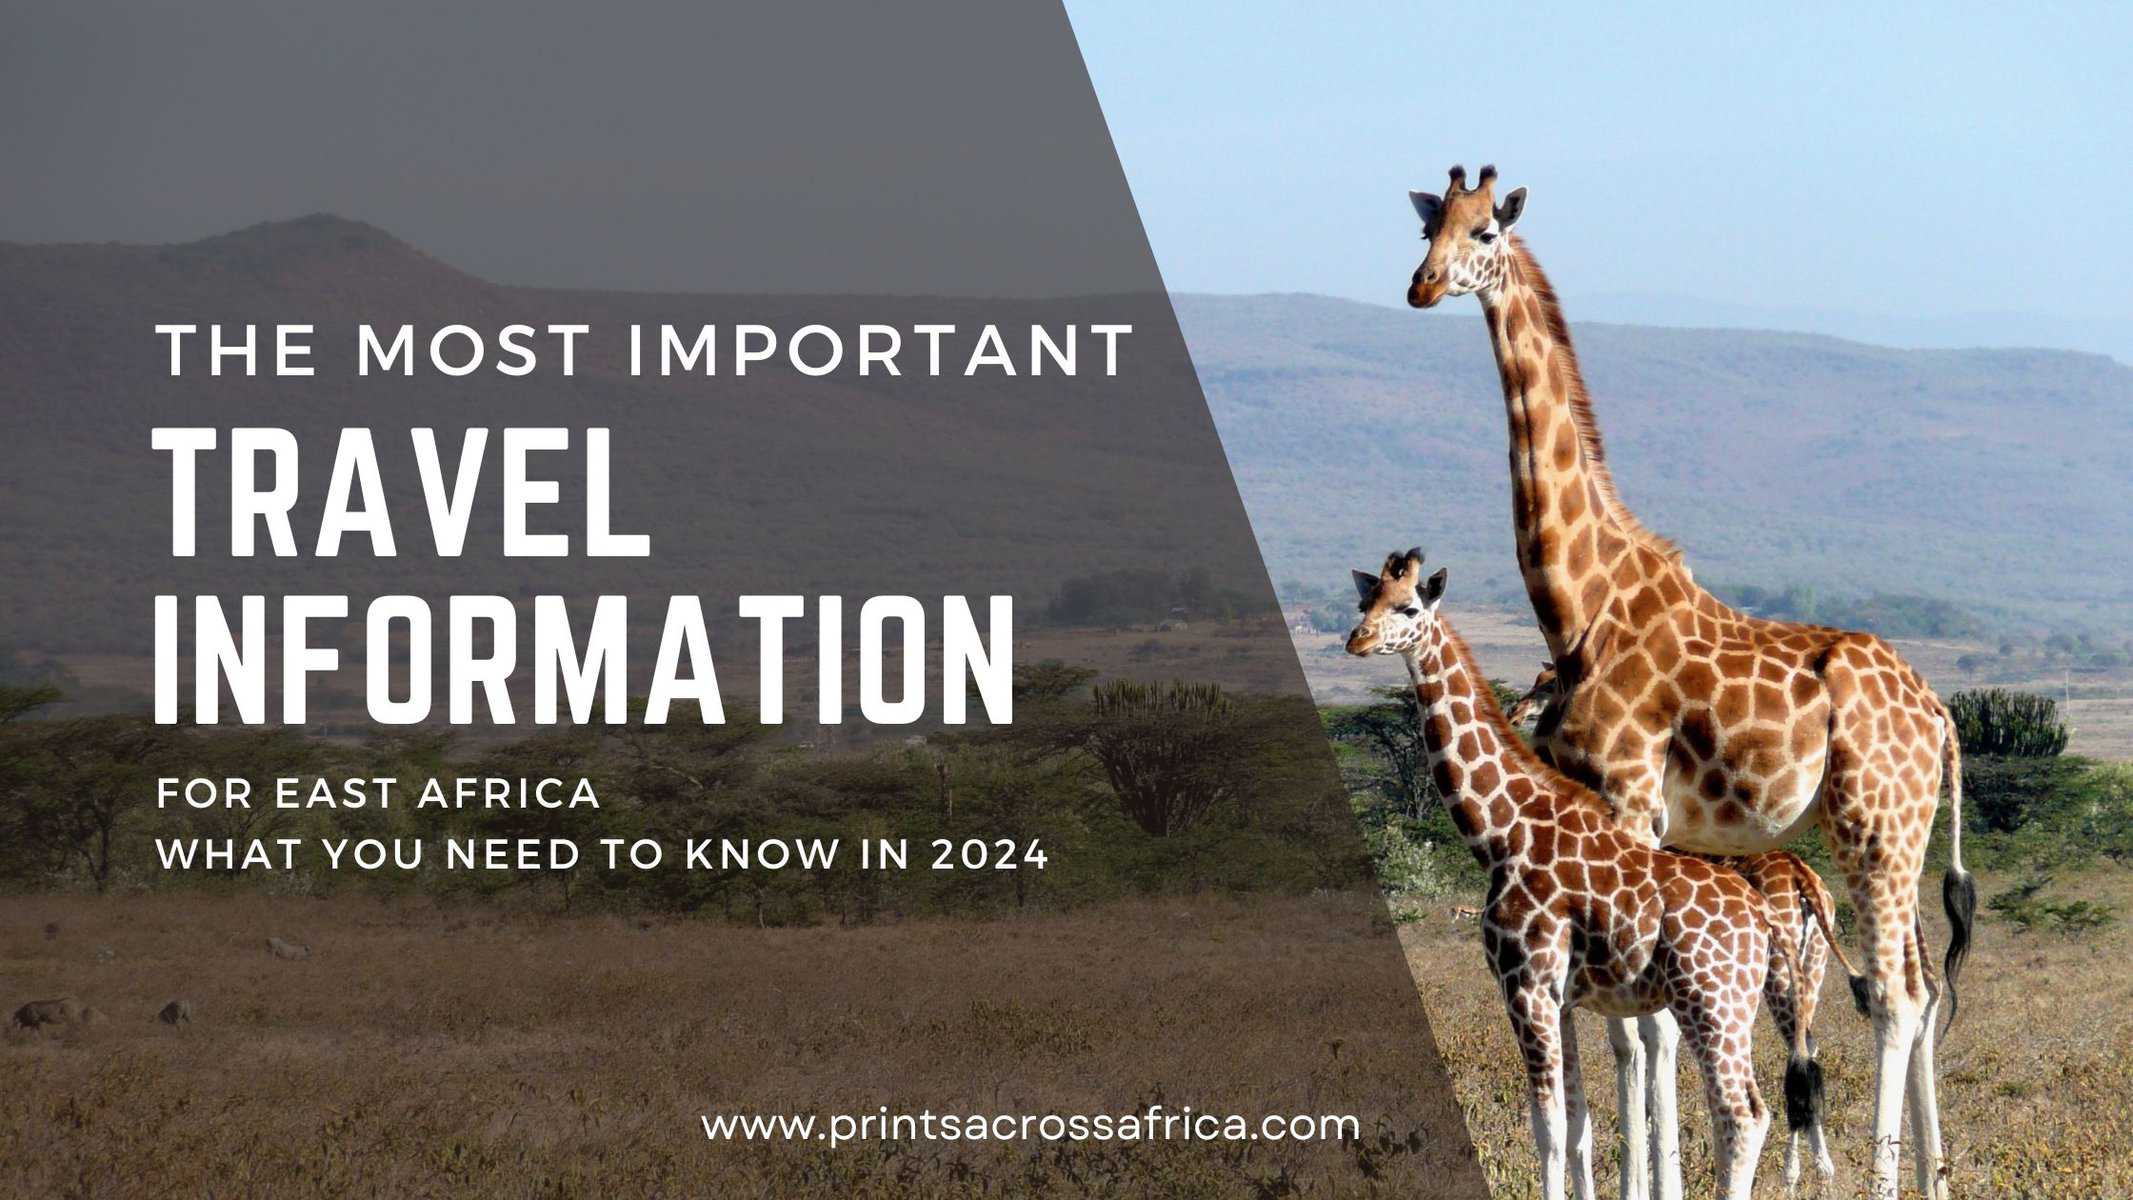 The most important travel information for east Africa, what you need to know in 2024